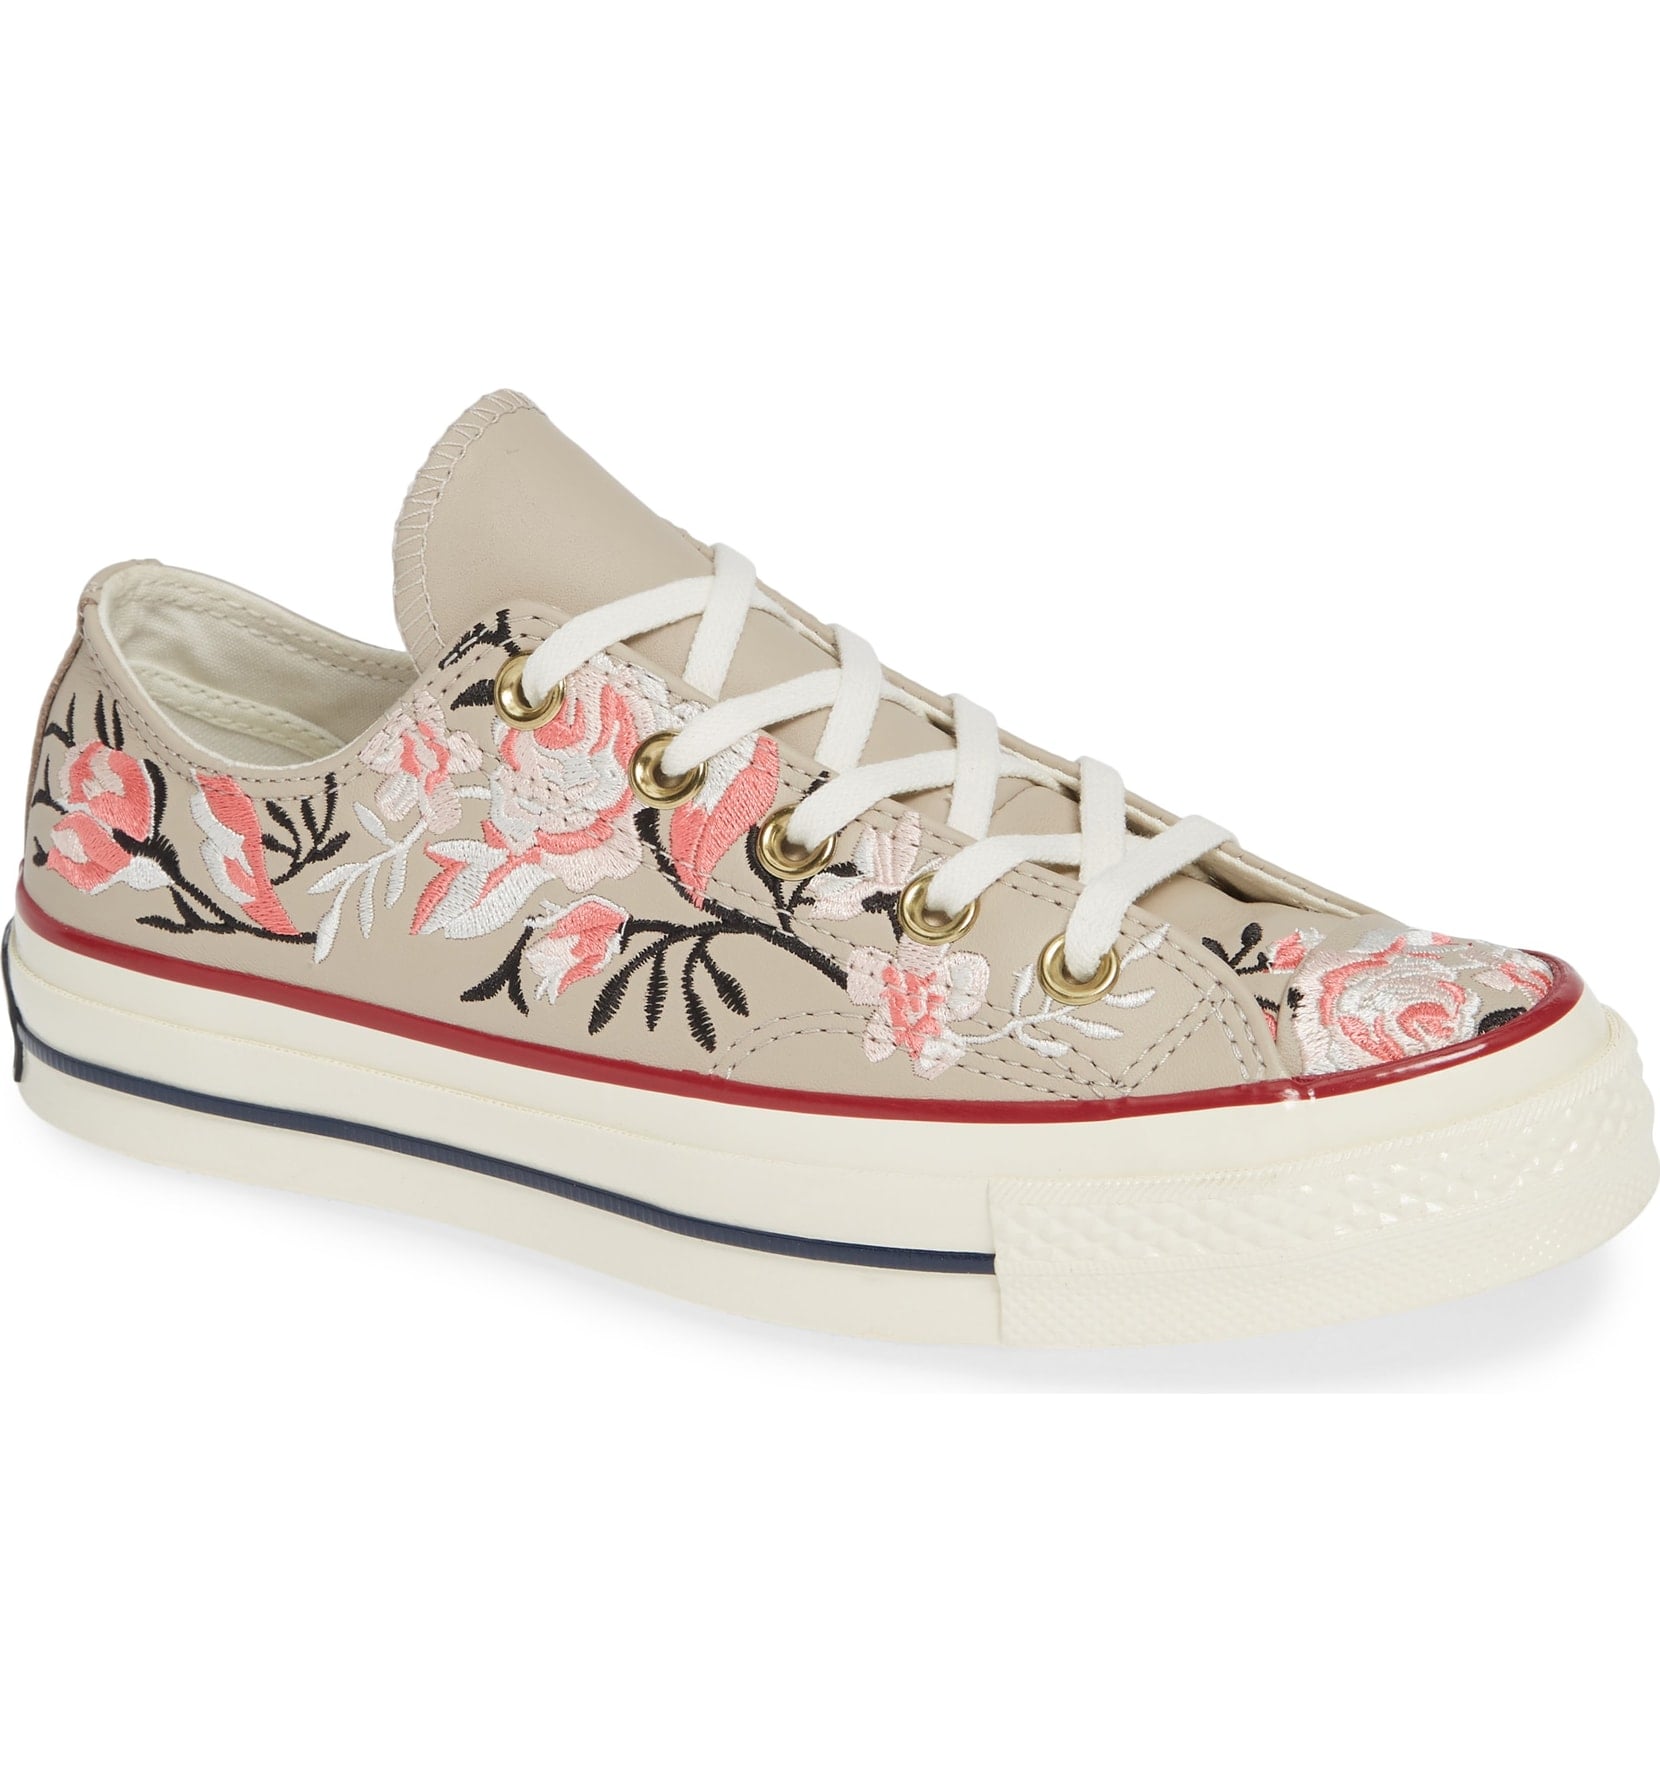 Converse Floral Sneakers 2018 